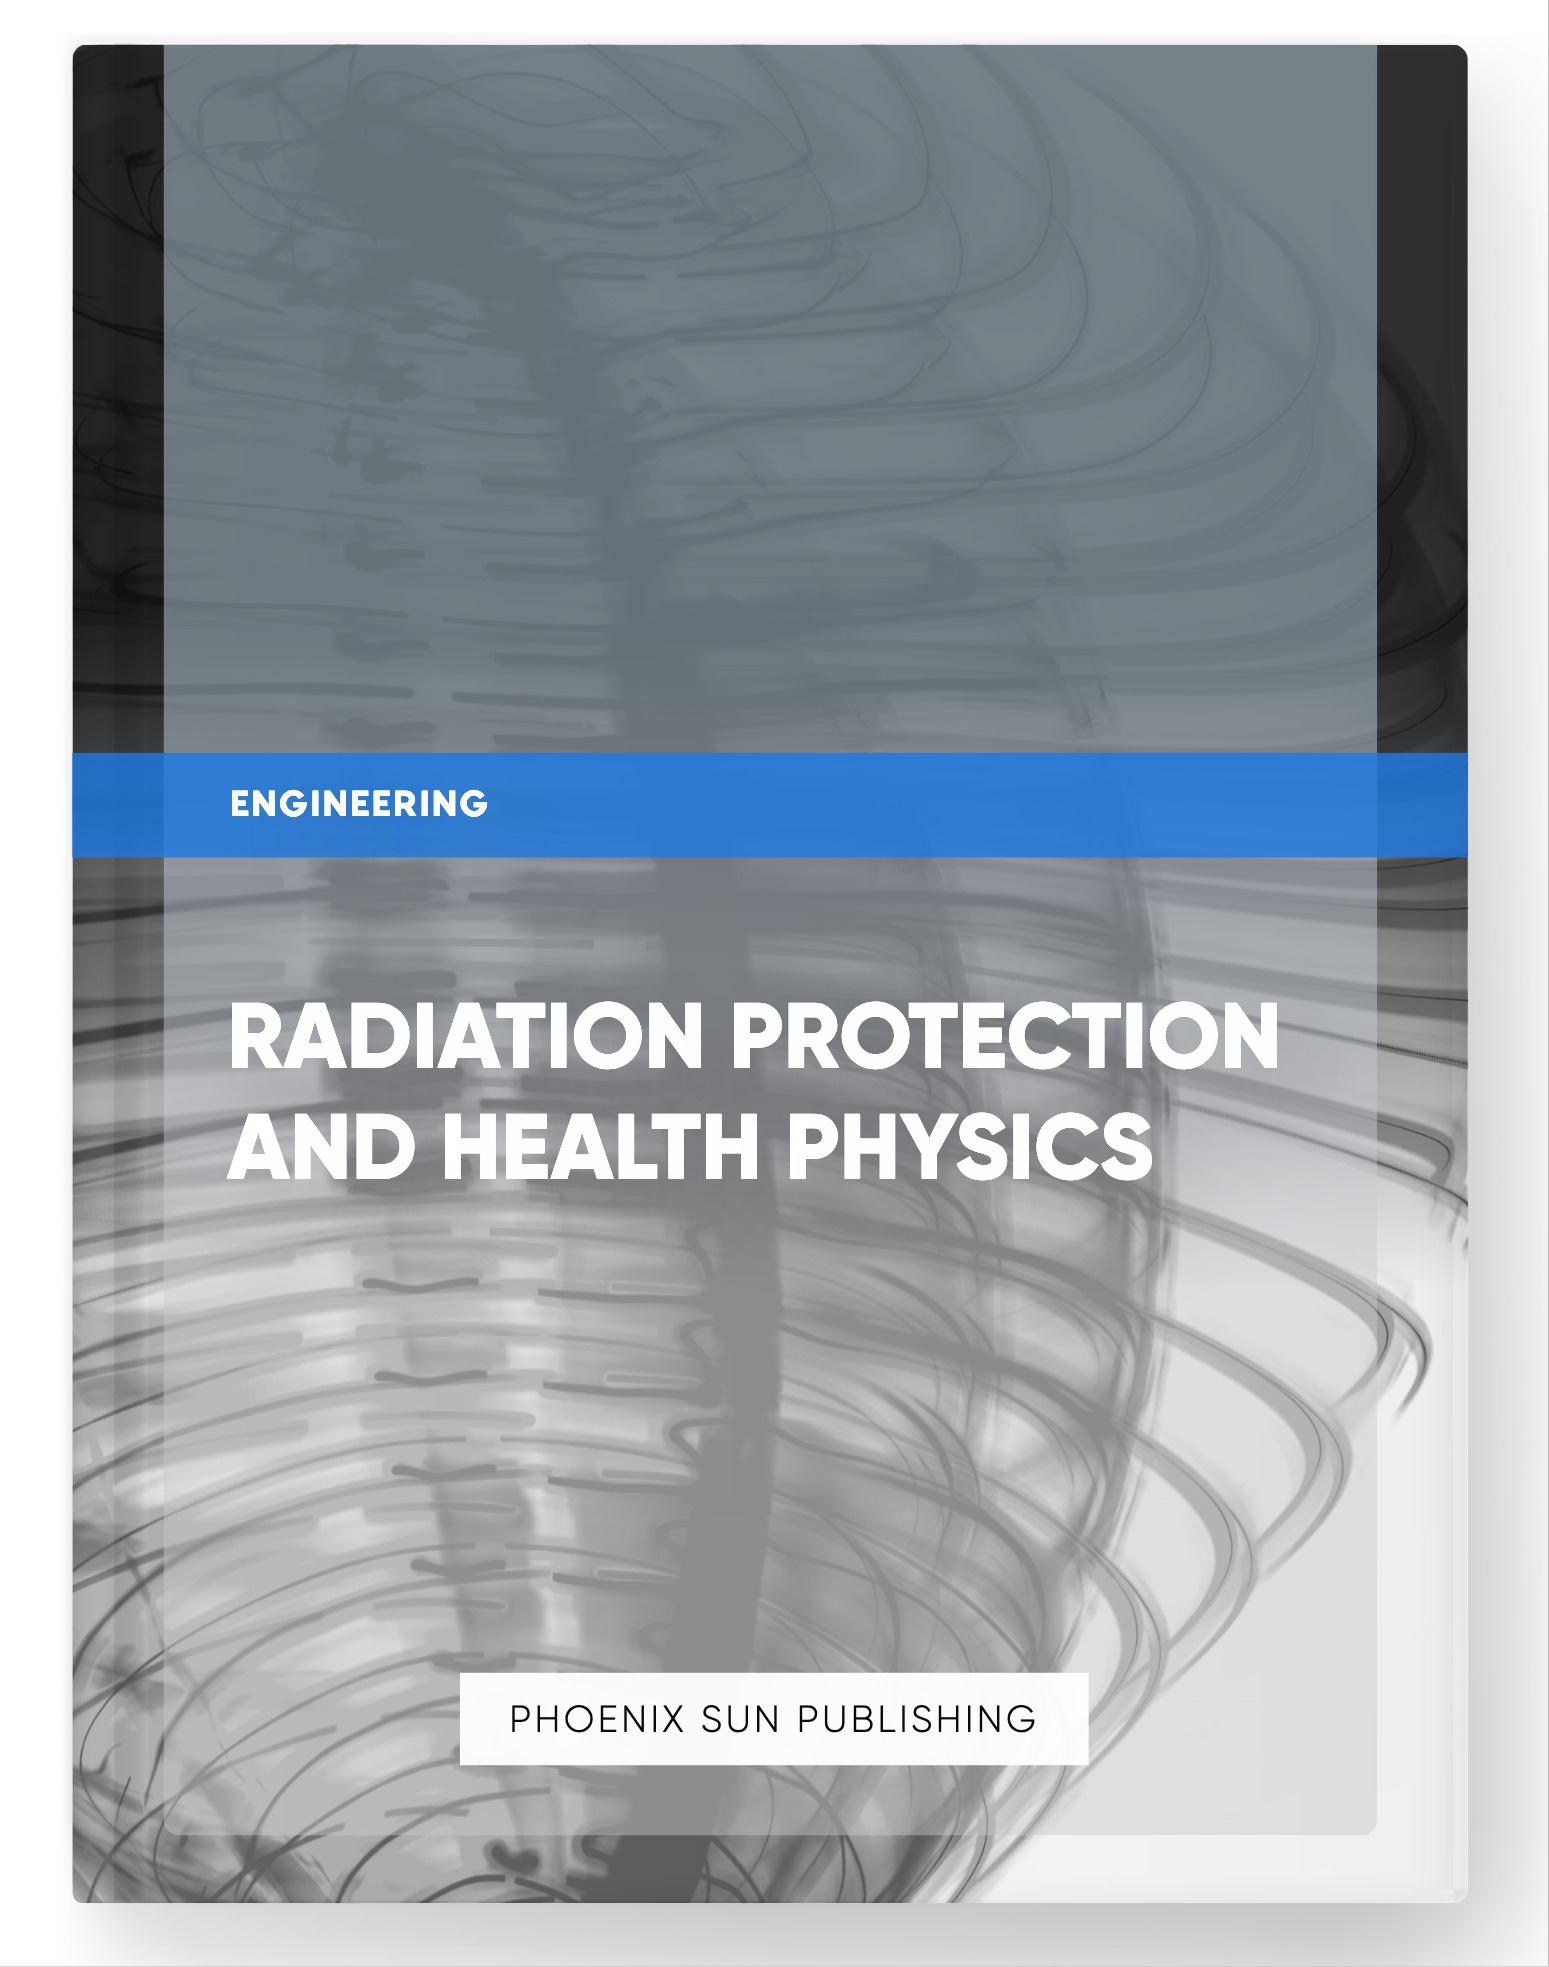 Radiation Protection and Health Physics